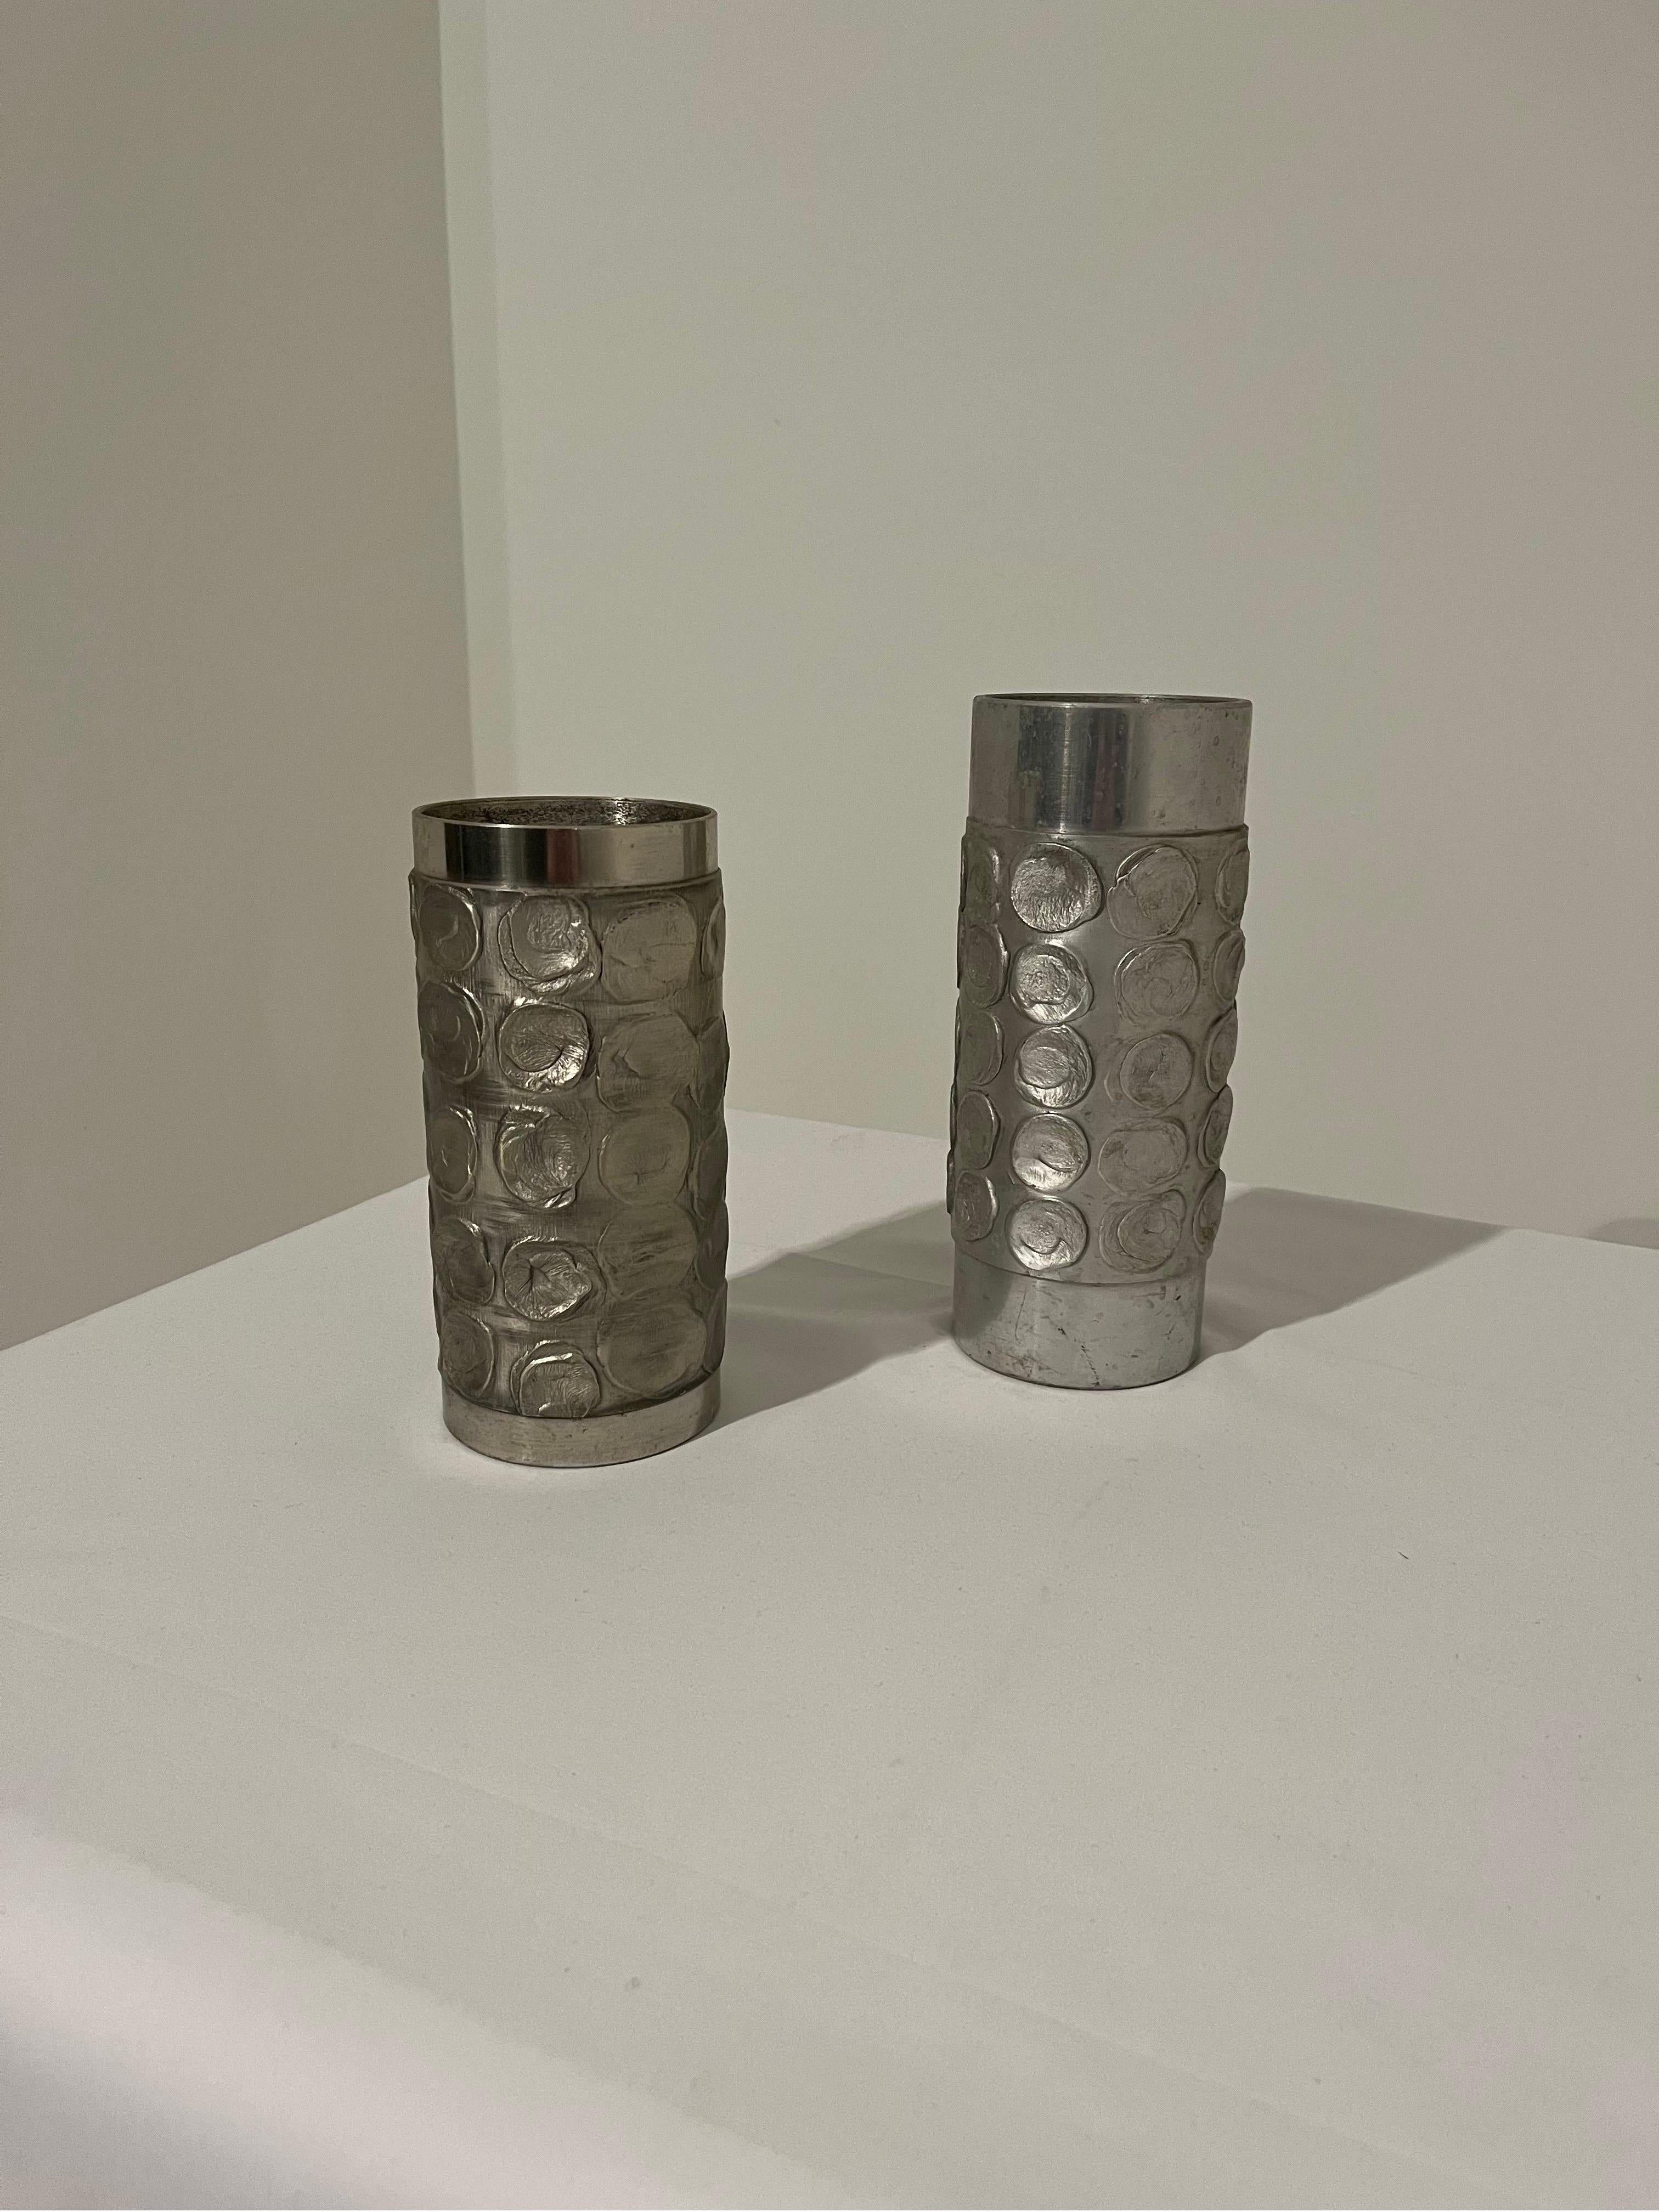 Large Brutalist Aluminium Vases 
From Germany 

Great size and texture. 
Height 21 and 25cm. 

